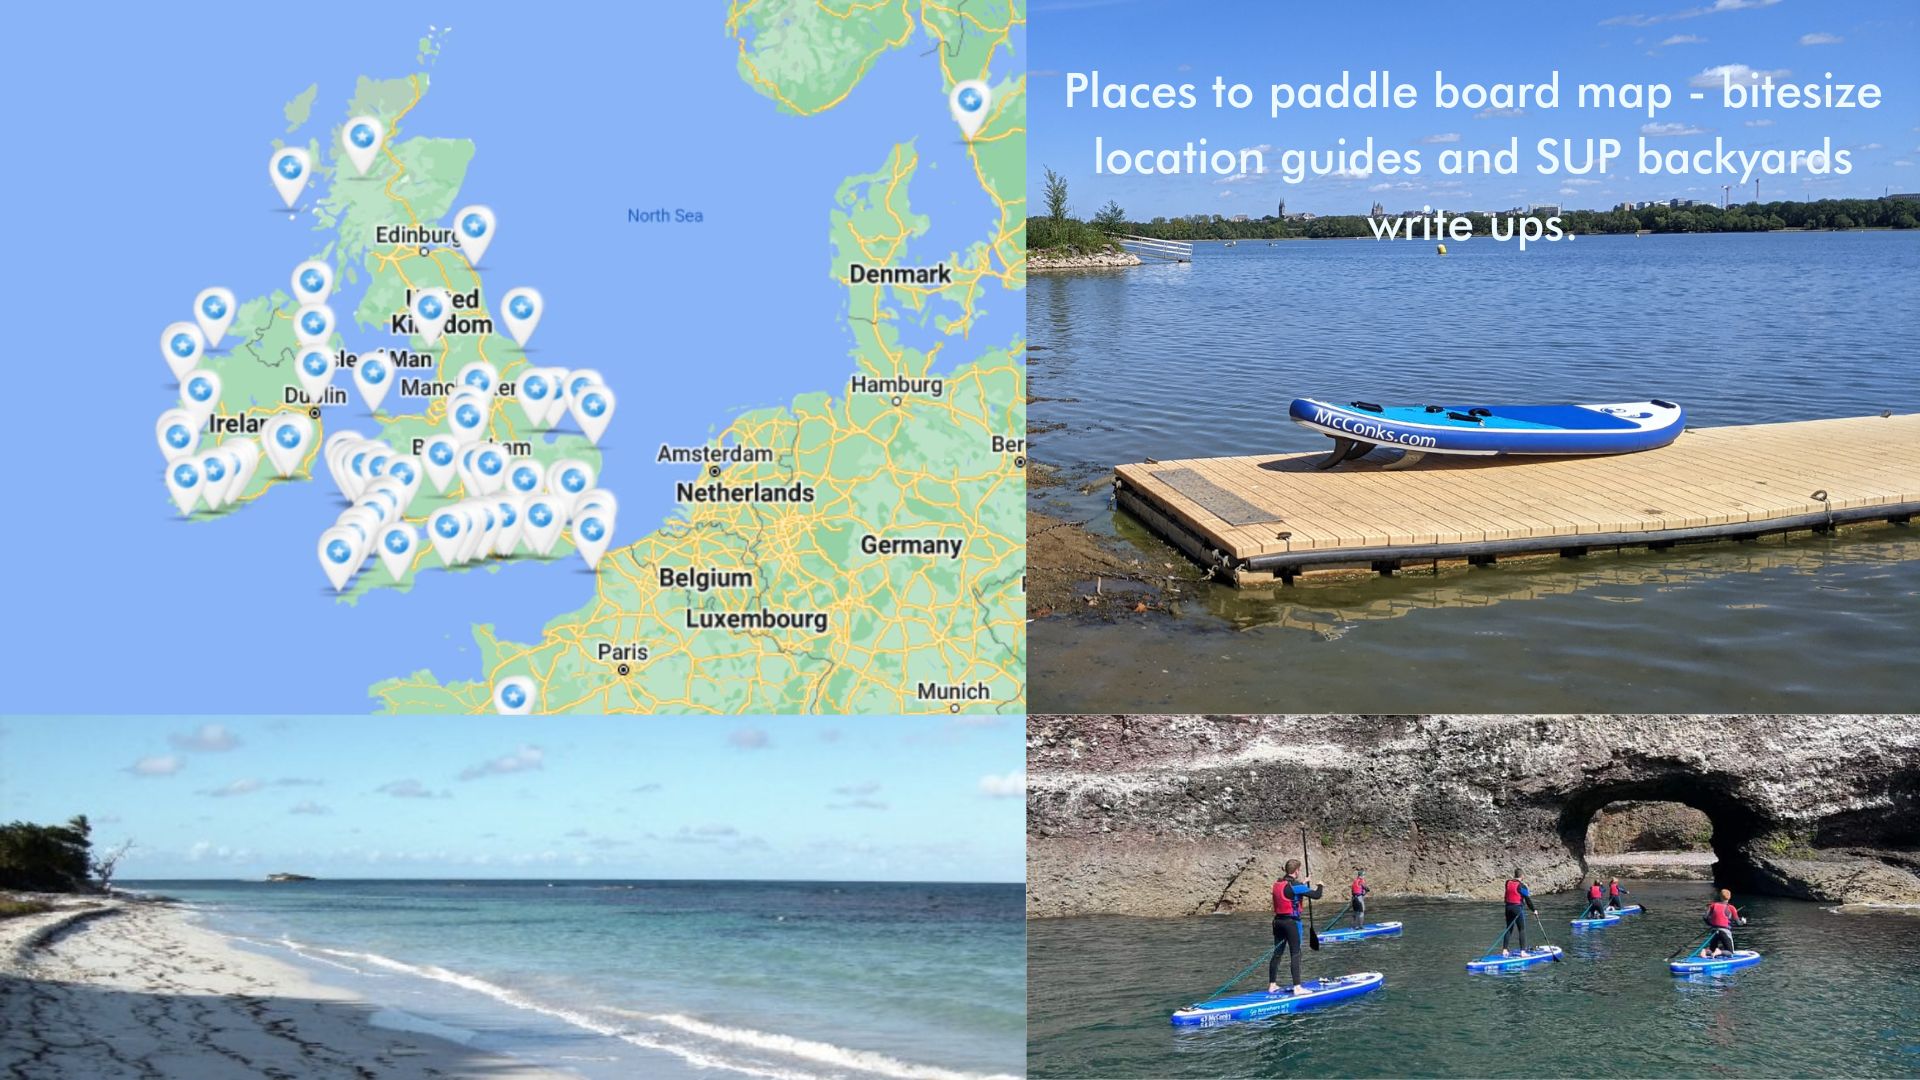 You are currently viewing Places to paddle board map – bitesize location guides and SUP backyards write ups.